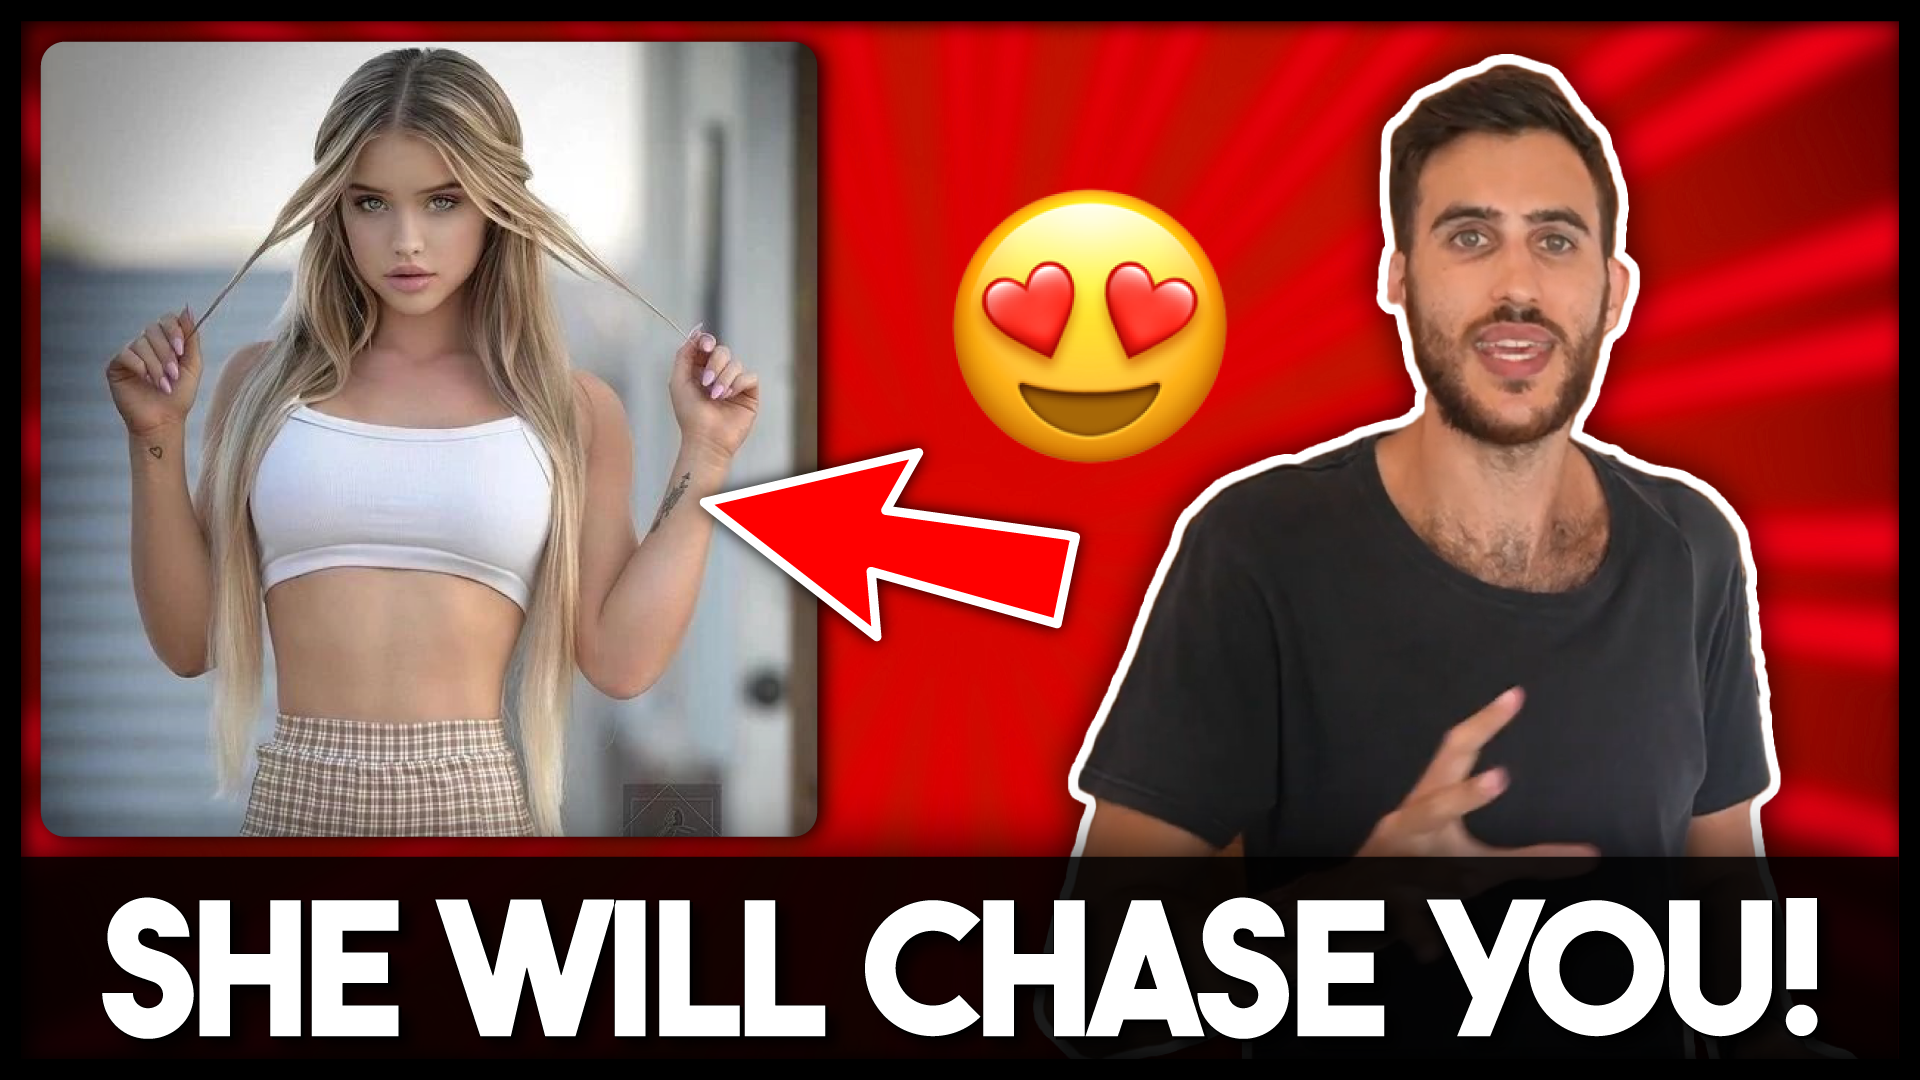 How To Get A Hot Girl To Chase You